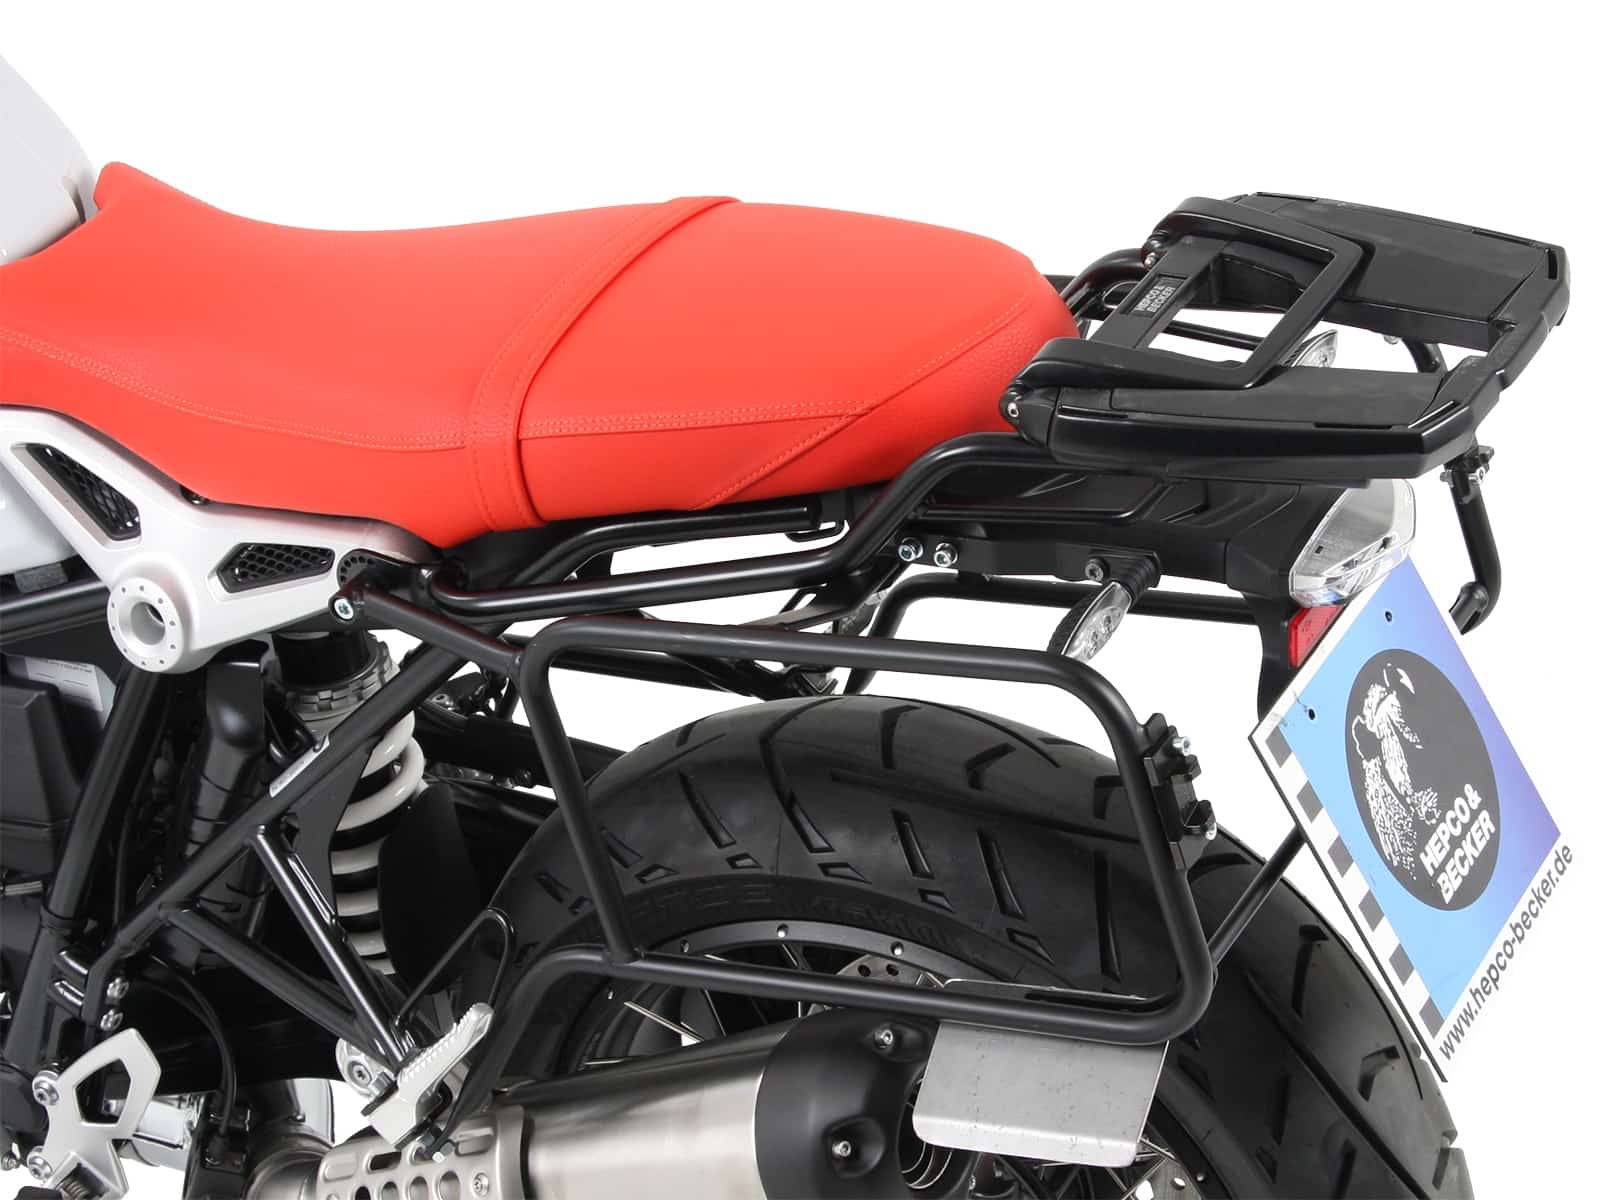 Sidecarrier permanent mounted black for BMW RnineT (2014-2016)